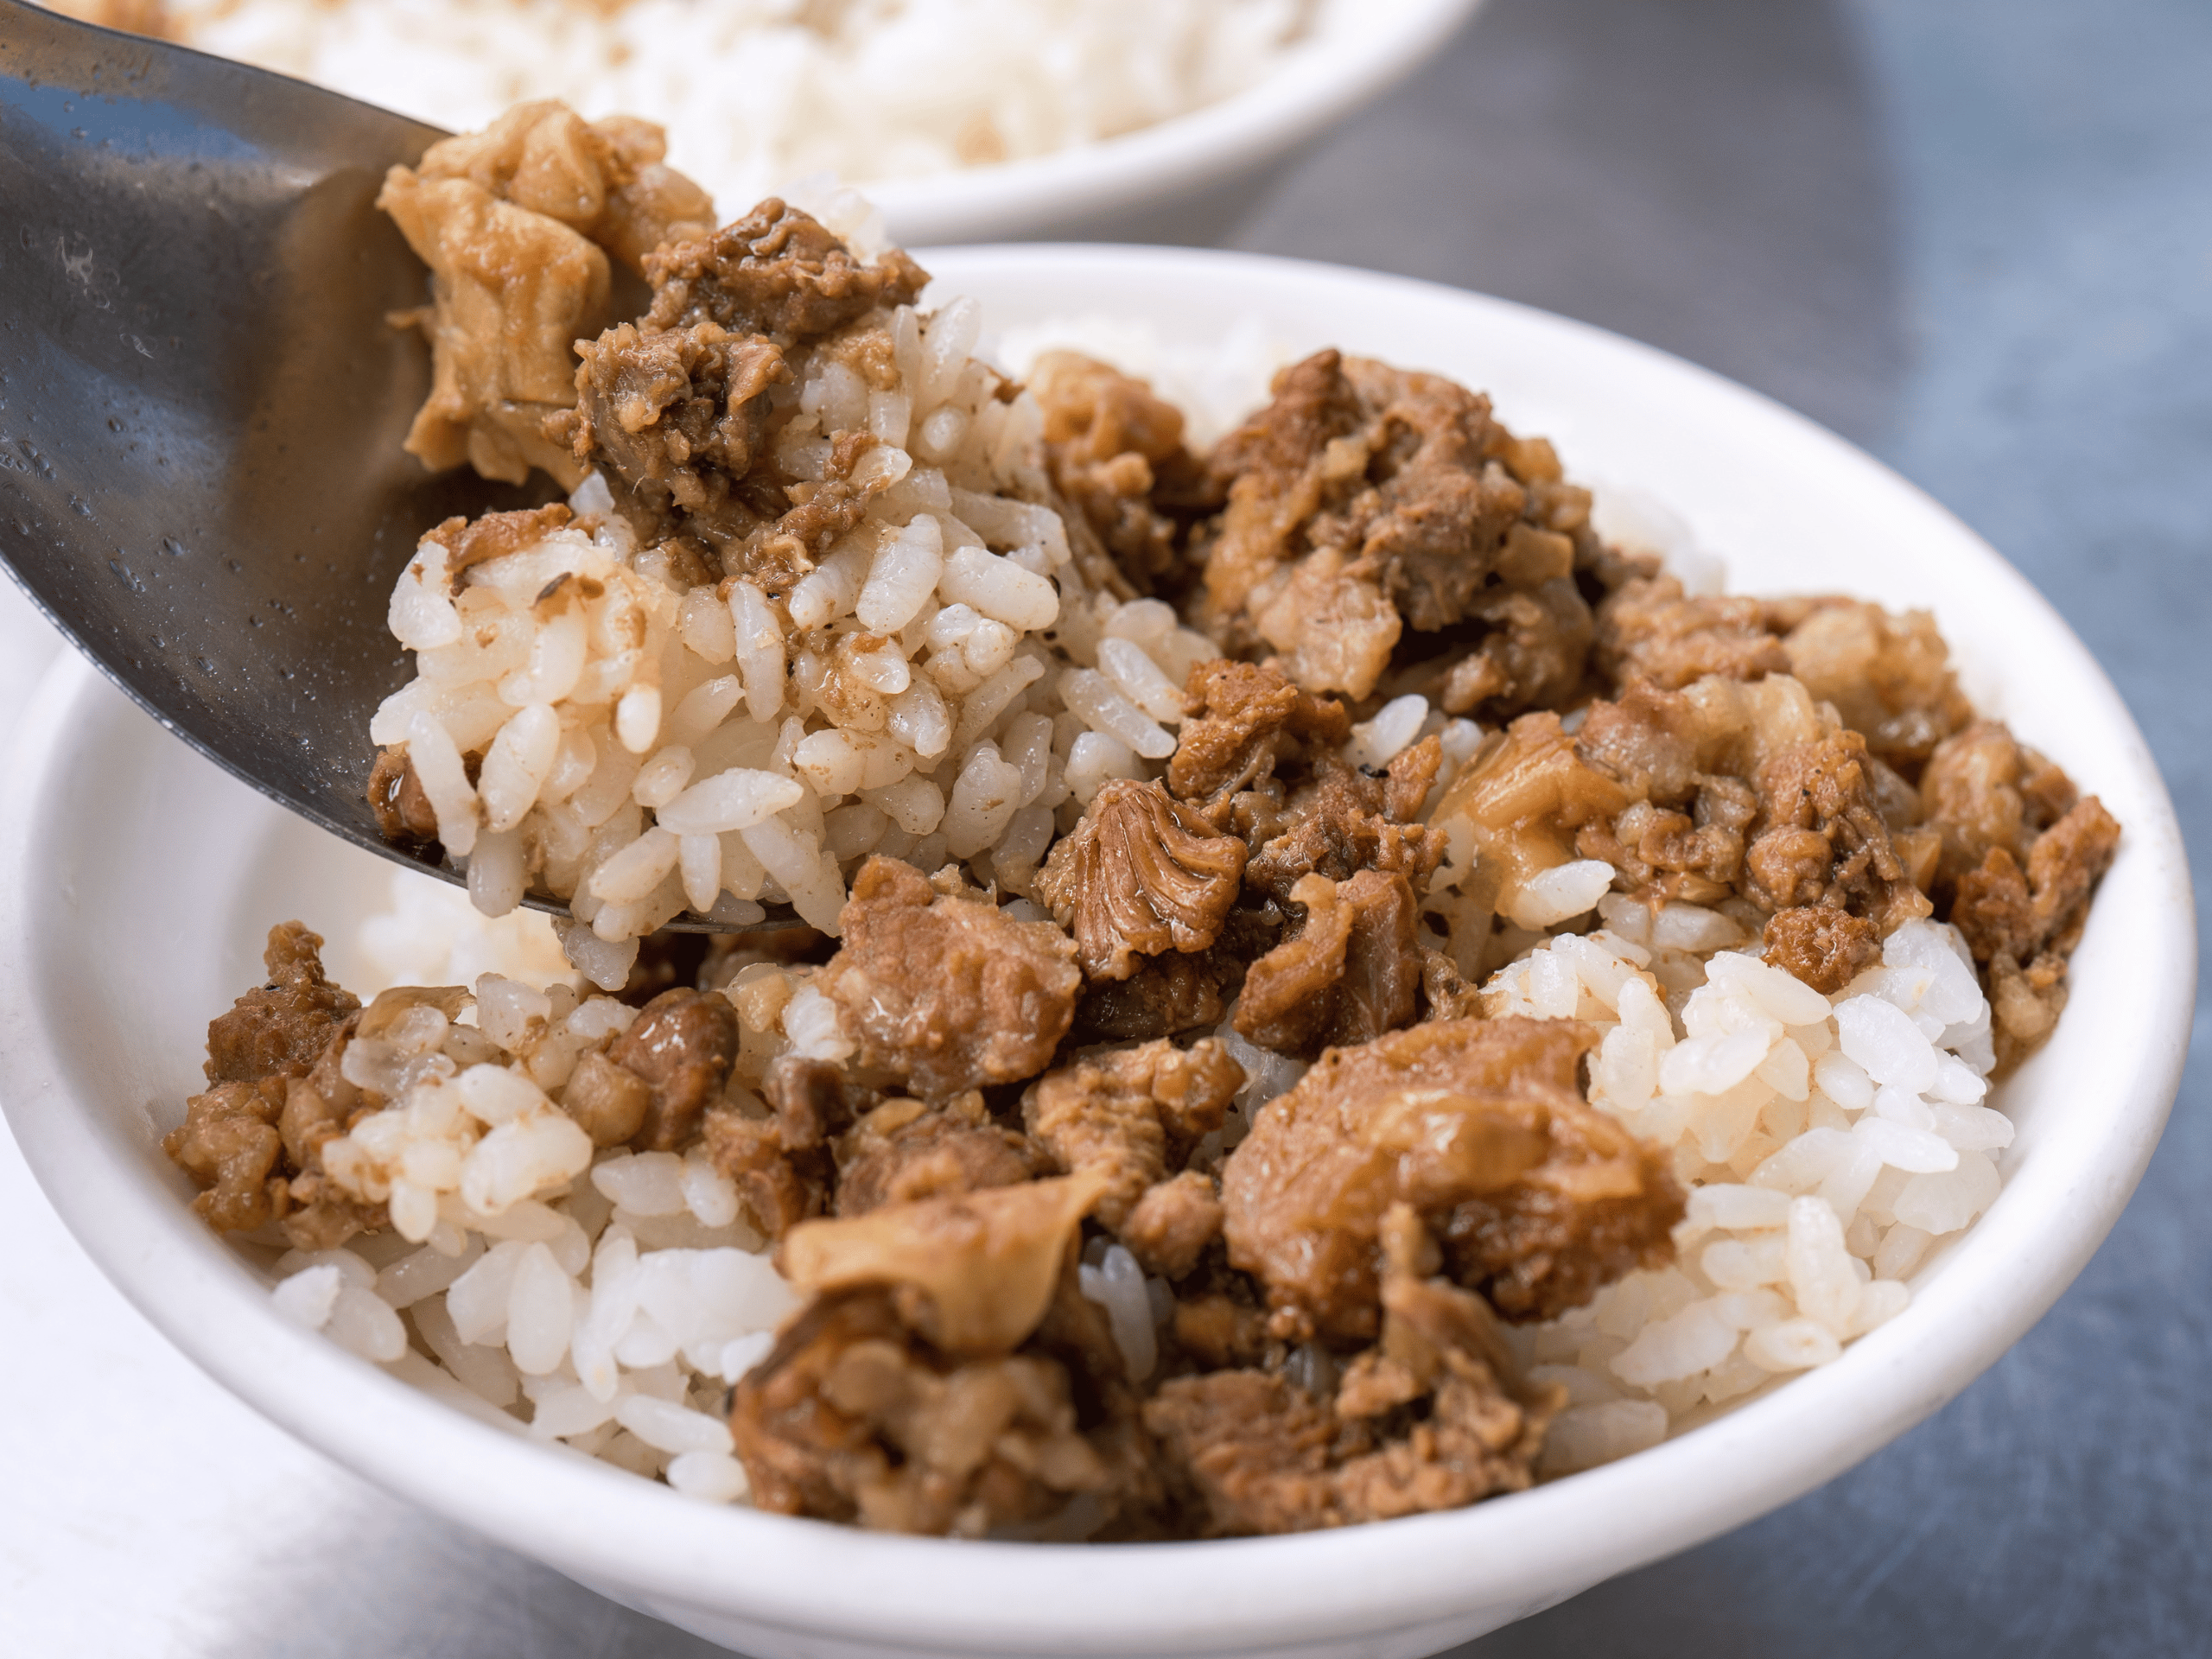 Beef over rice in a white bowl